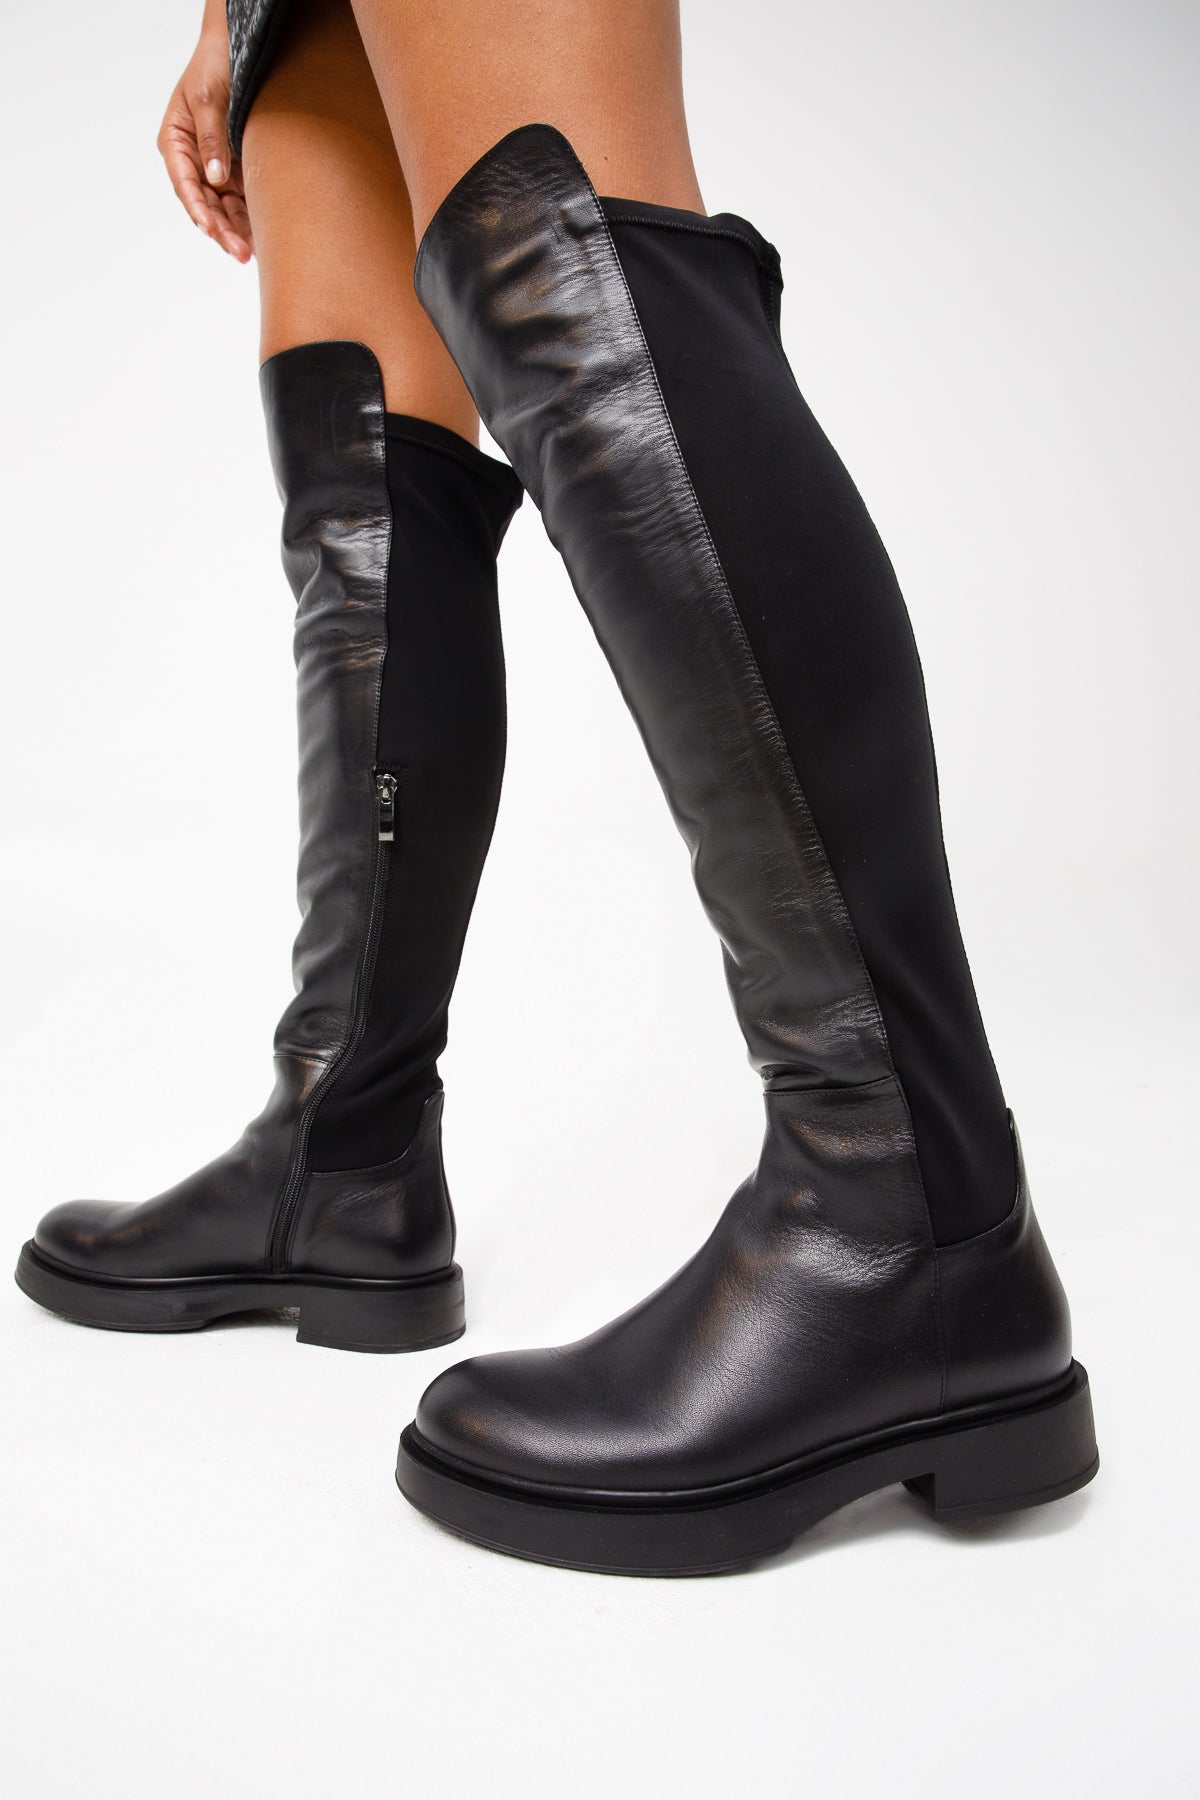 The Harmony Belle Black Leather Knee High Women Boot